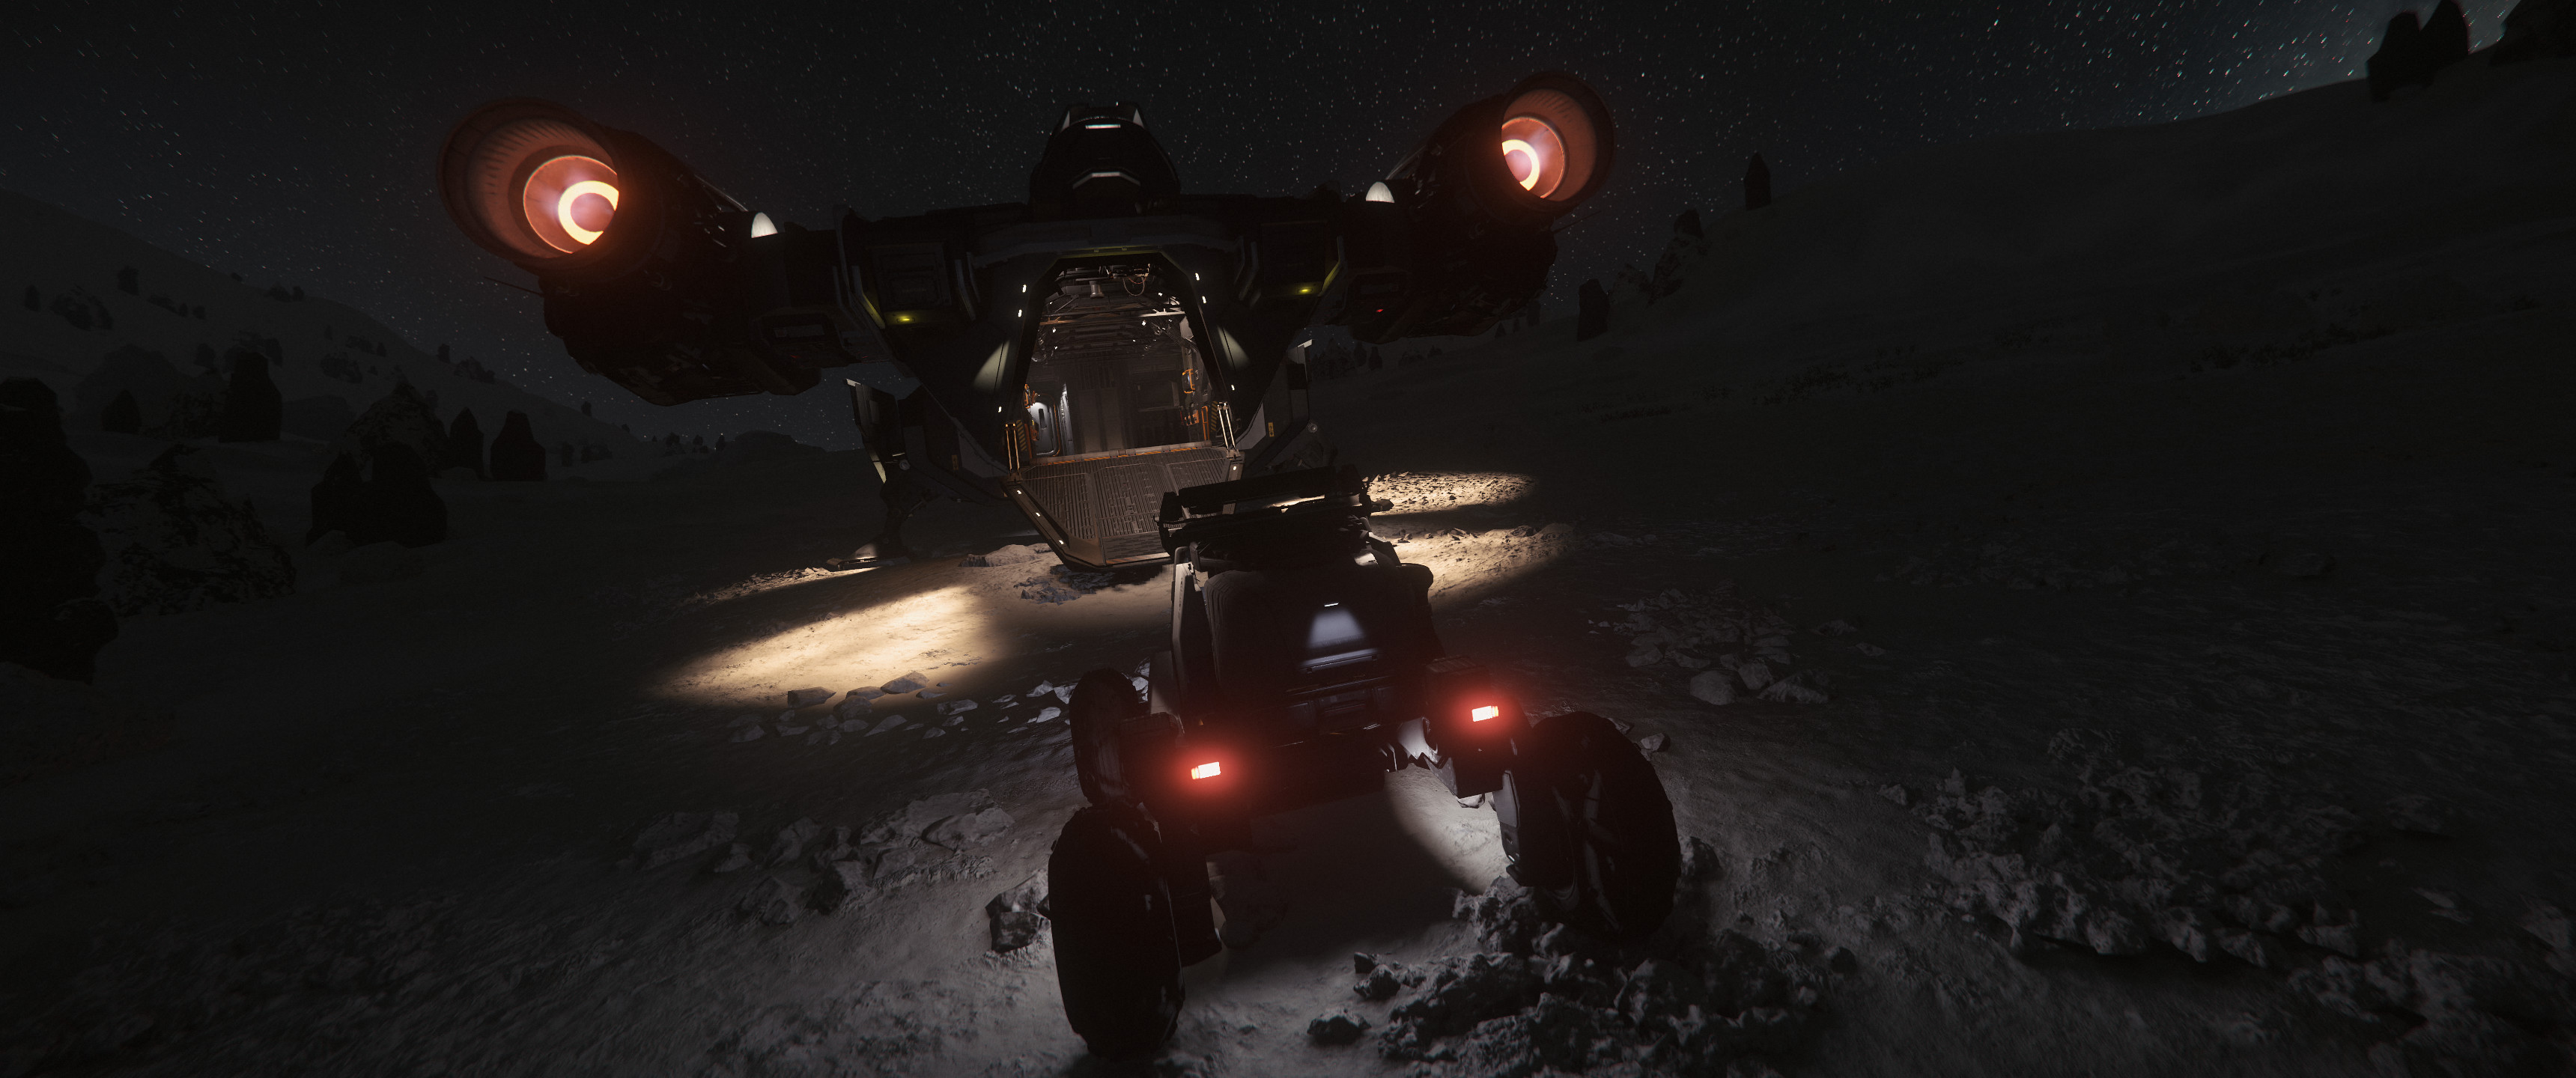 Wide-angle, first person view of a ship landed on a moon, cargo door open, and a mining utility vehicle just outside the ramp—handsomely lit by stars and vehicle lights